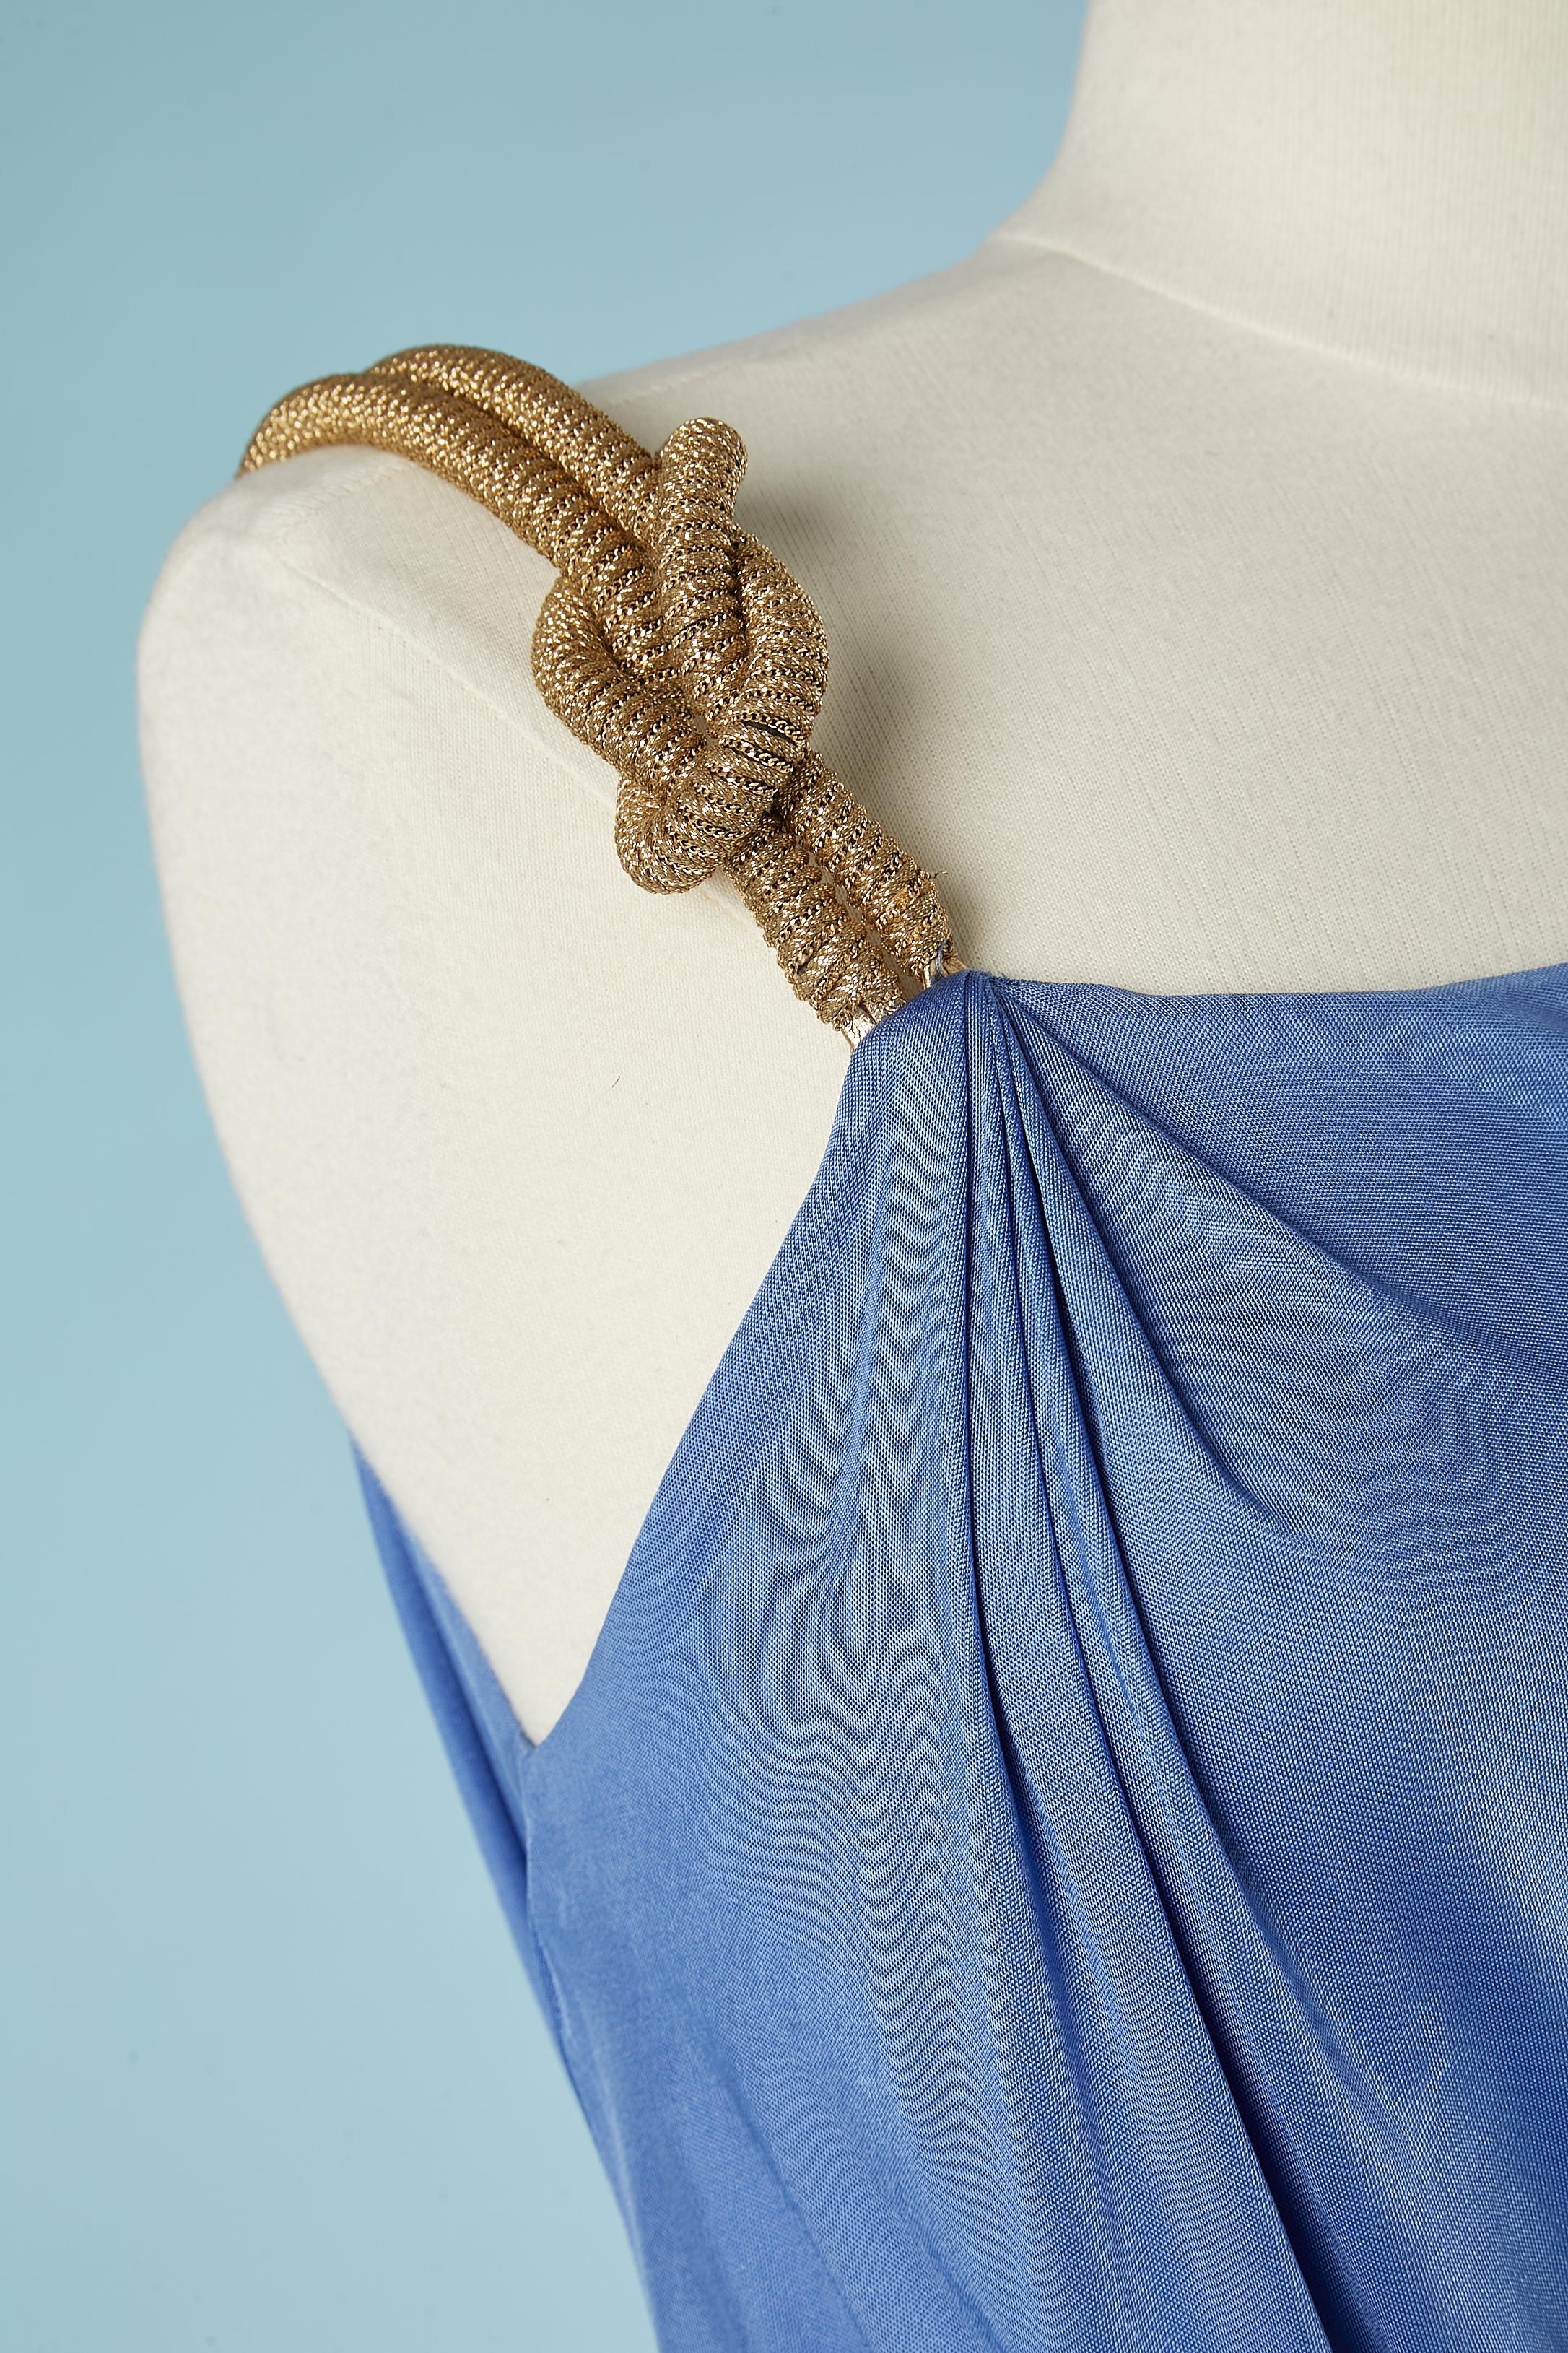 Asymmetrical blue drape rayon dress with gold shoulder strap passementerie.
Split on the right side = 60 cm 
Fabric: 100% rayon.
SIZE :42 (It) 38 (Fr) M